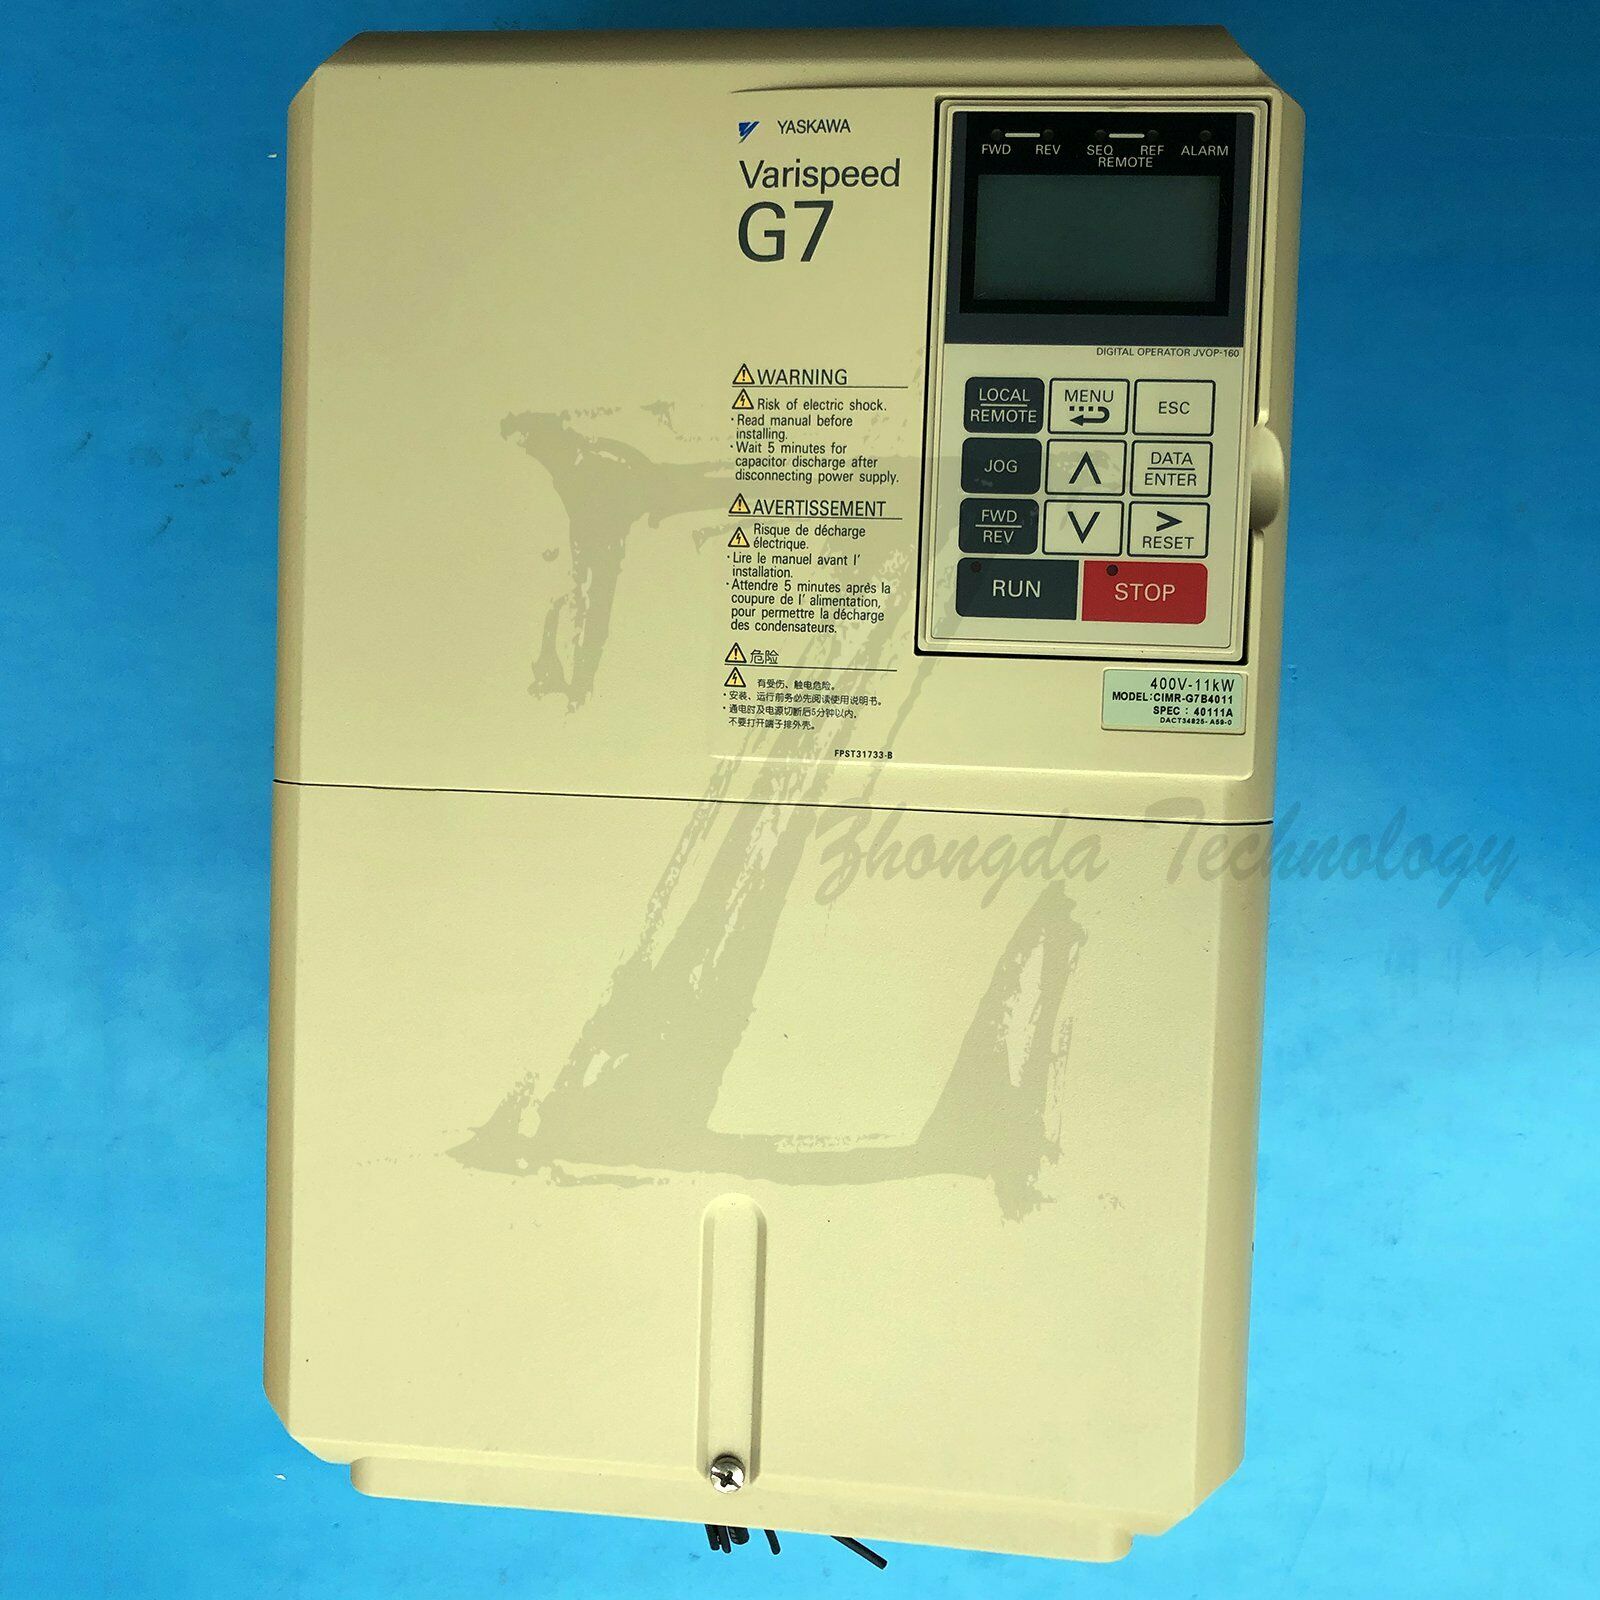 1PC Used Yaskawa CIMR-G7B4011 380V 11KW Tested In Good Condition KOEED 500+, 70%, import_2020_10_10_031751, Other, Yaskawa